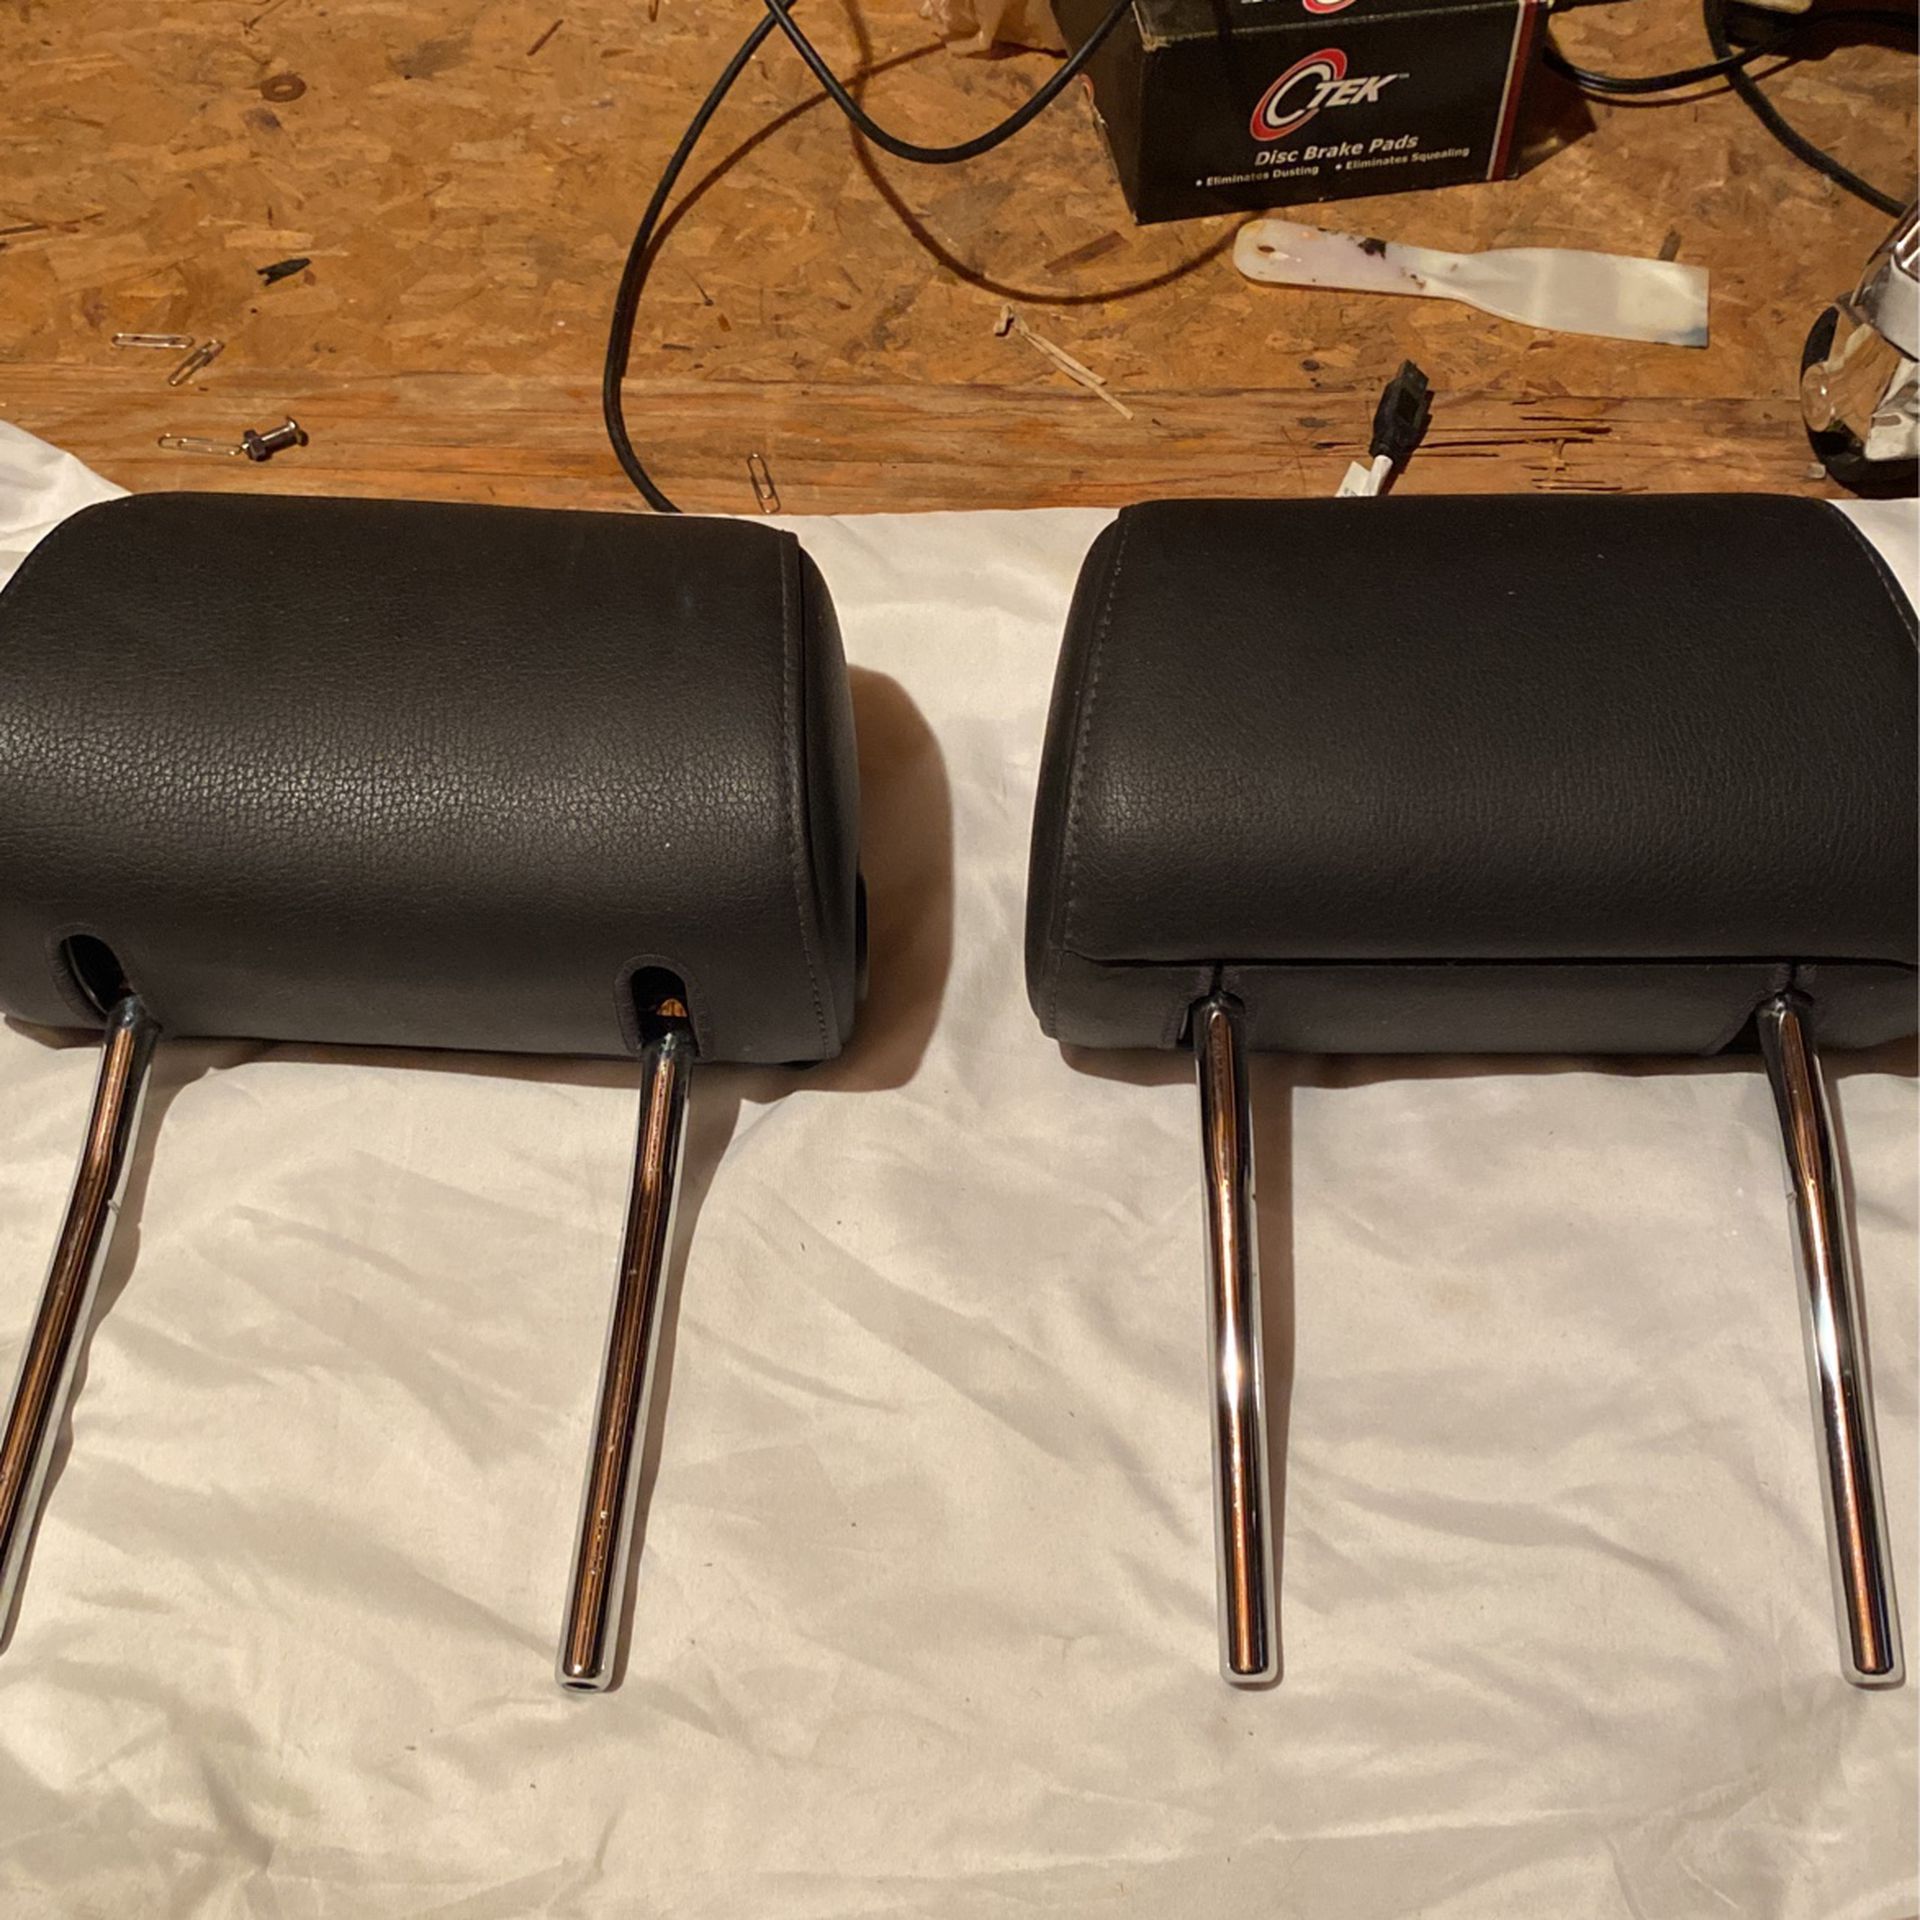 Audi Q7 Headrests Two For 50